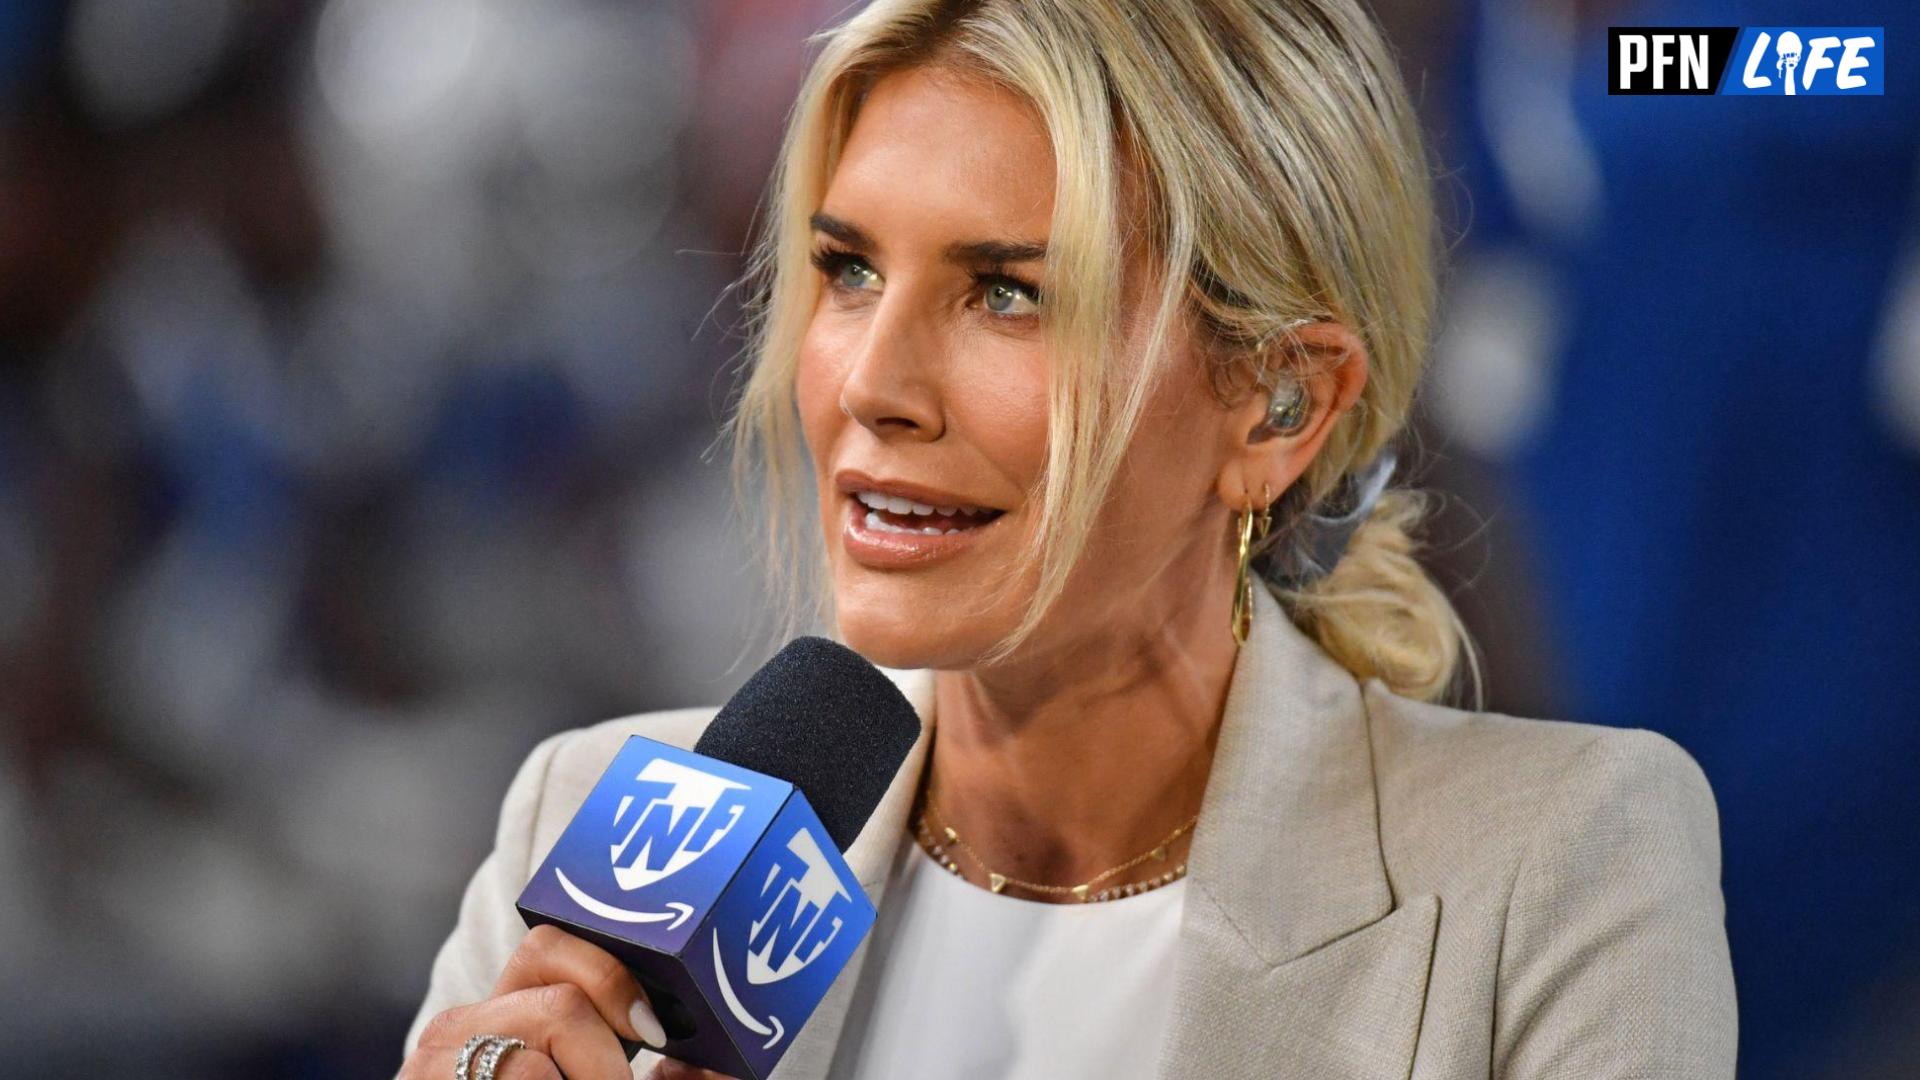 Thursday Night Football host Charissa Thompson during the NFL game